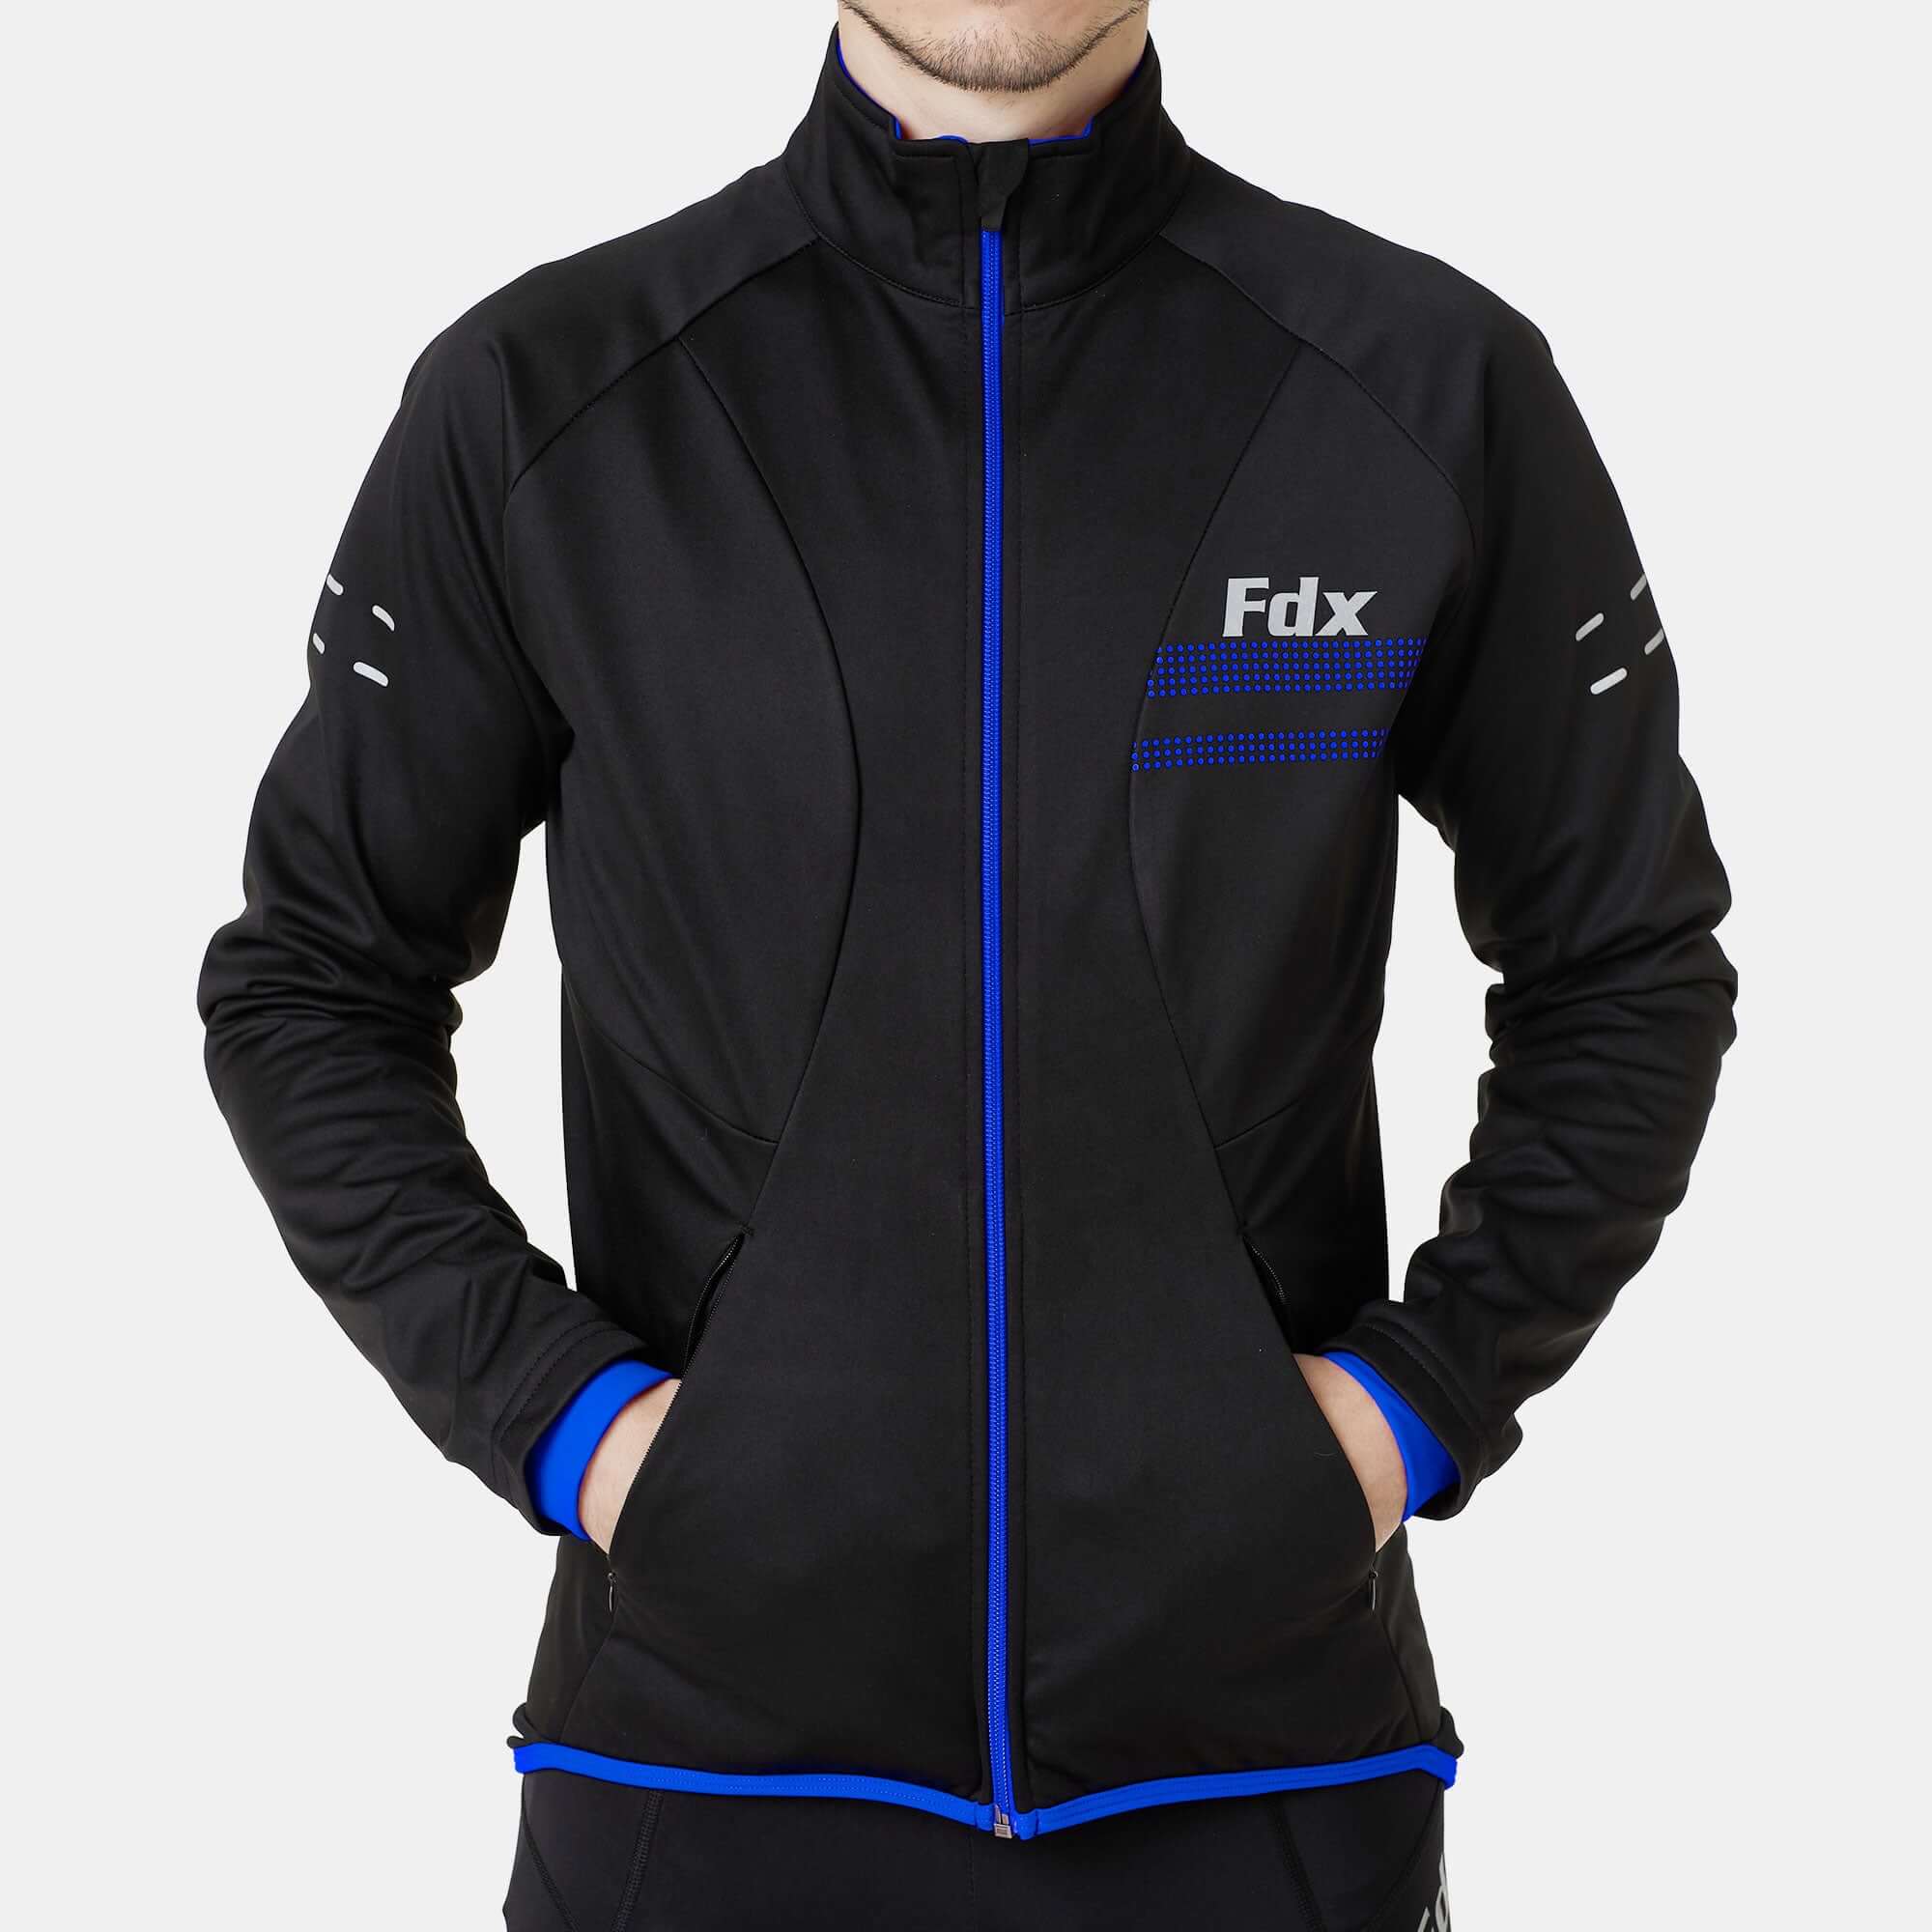 Fdx Men's Windbreaker Cycling Black & Blue Jacket for Winter Thermal Casual Softshell Clothing Lightweight, Windproof, Waterproof & Pockets - Arch